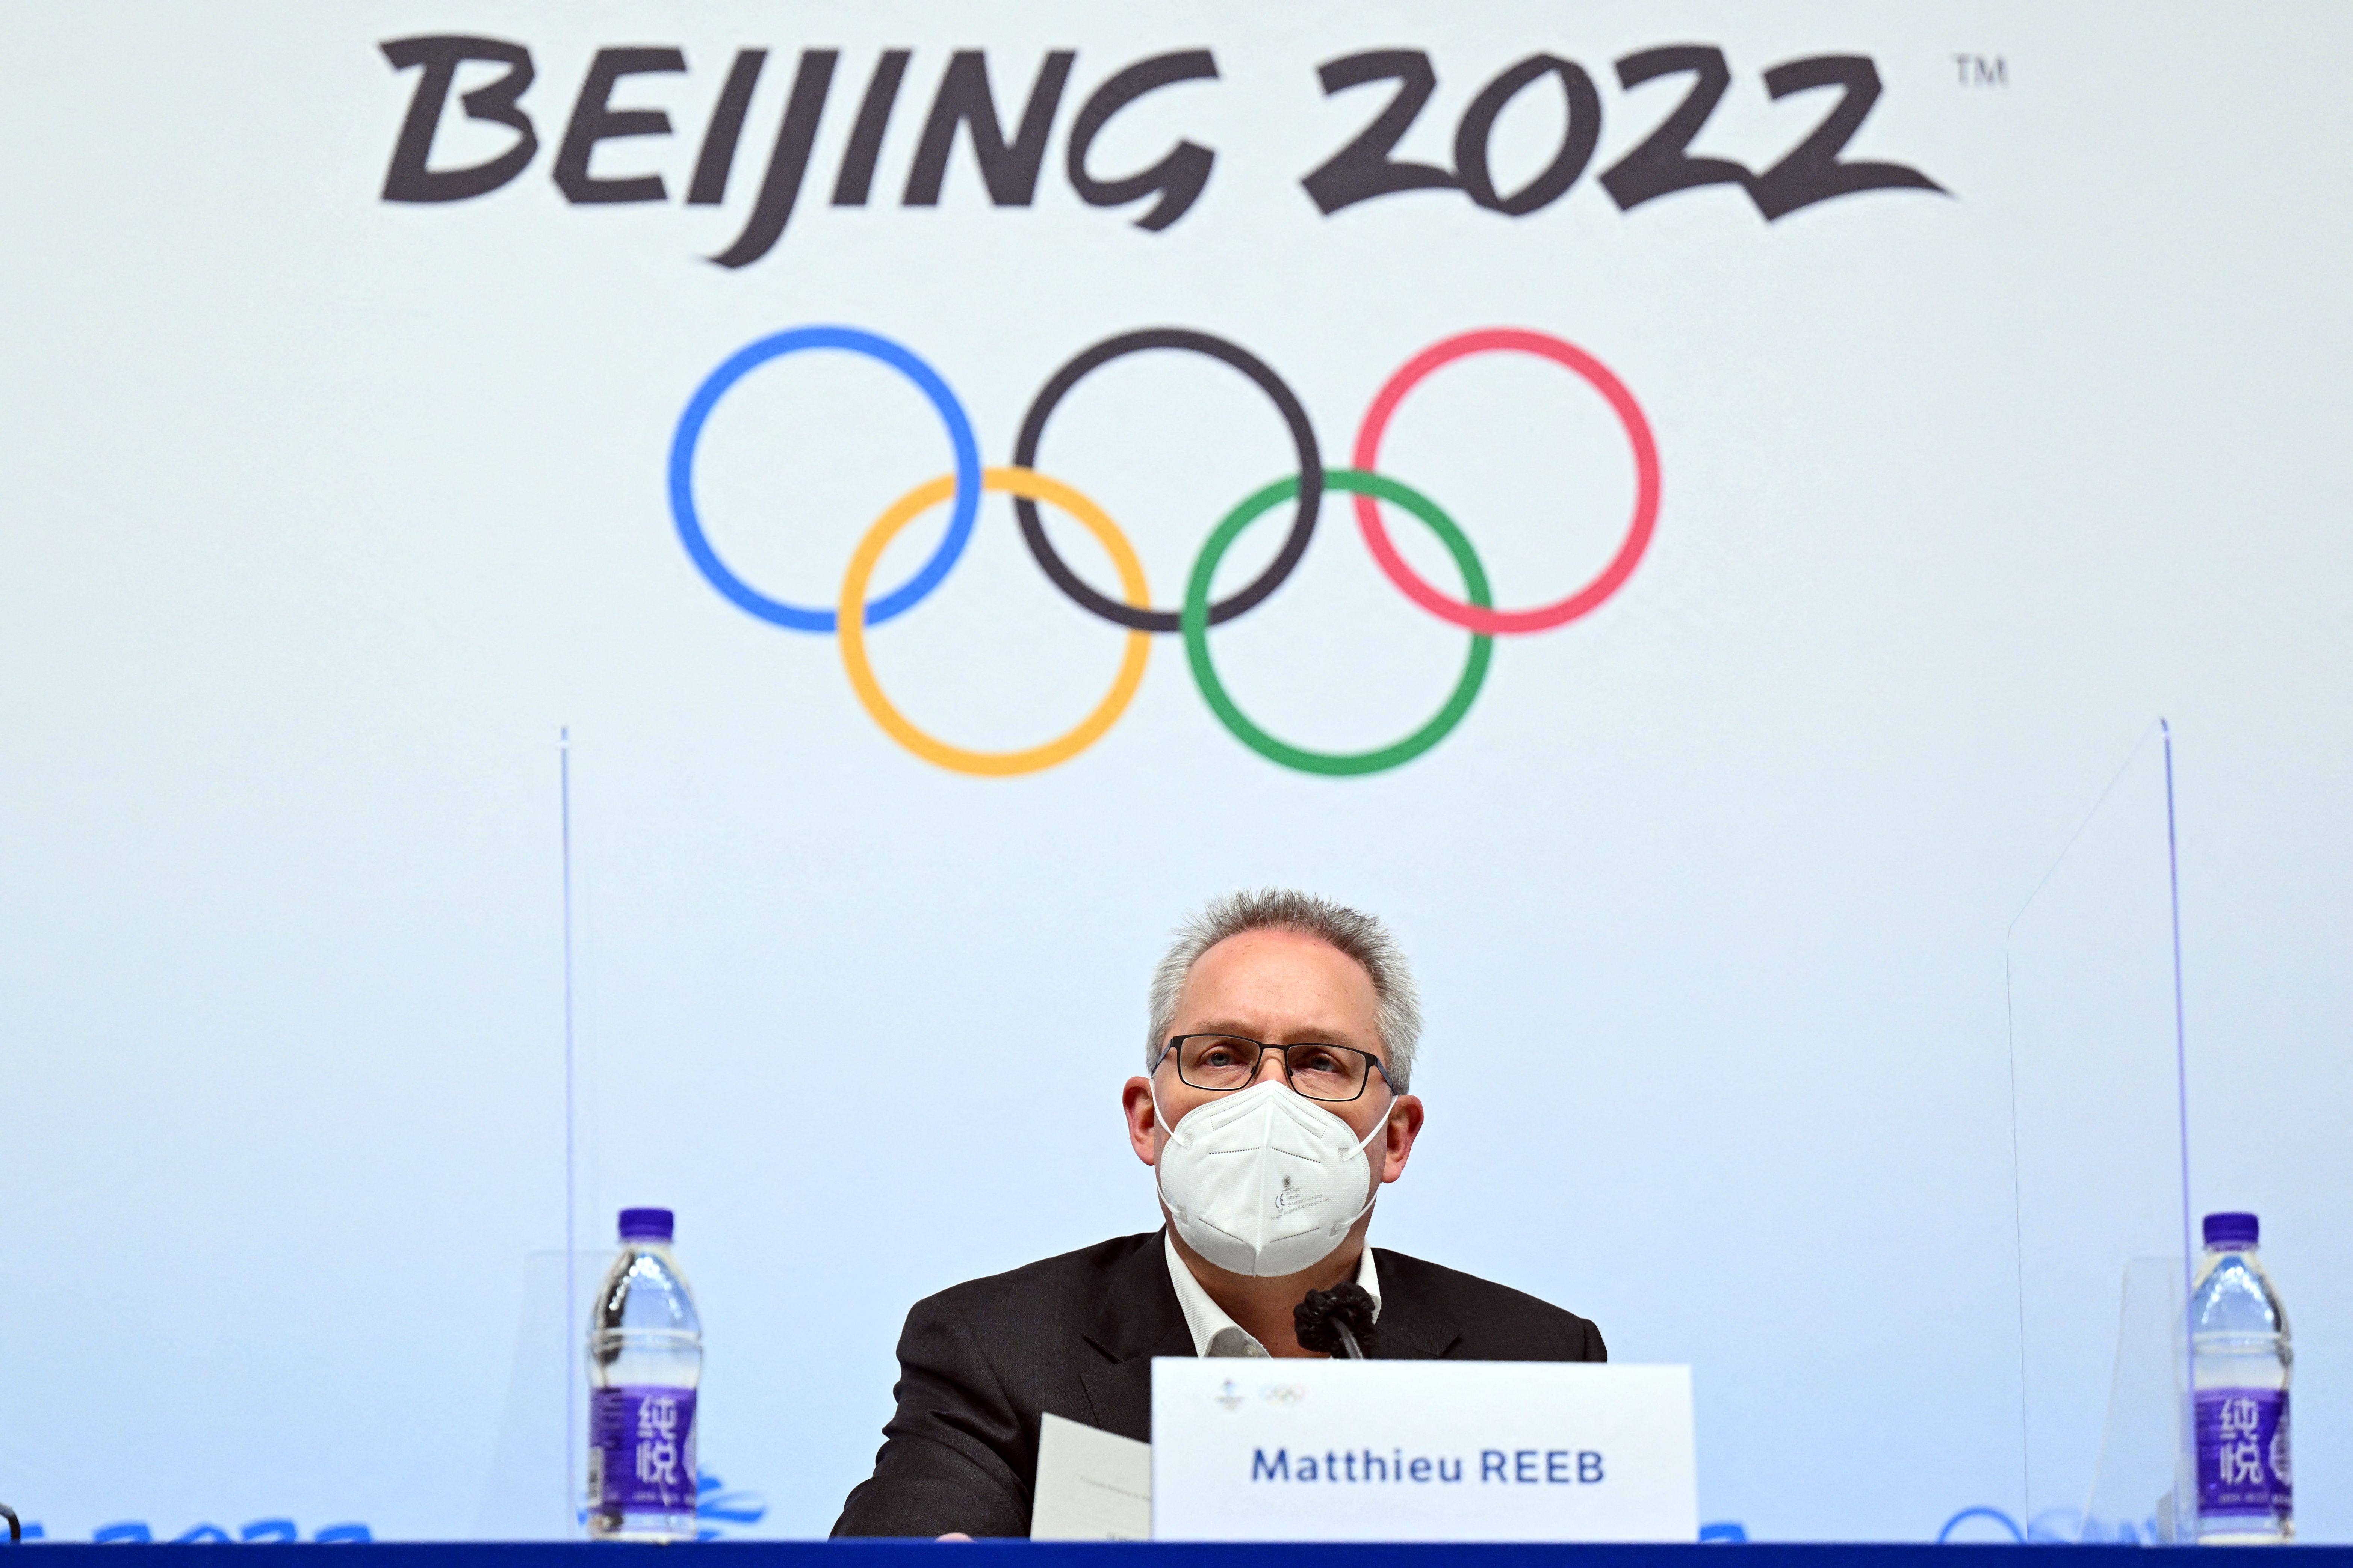 The Court of Arbitration for Sport's Director General, Matthieu Reeb, attends a press conference to announce CAS' ruling on 15-year-old Russian skater Kamila Valieva, after she tested positive for a banned substance in December, at the Main Media Centre in Beijing on February 14.